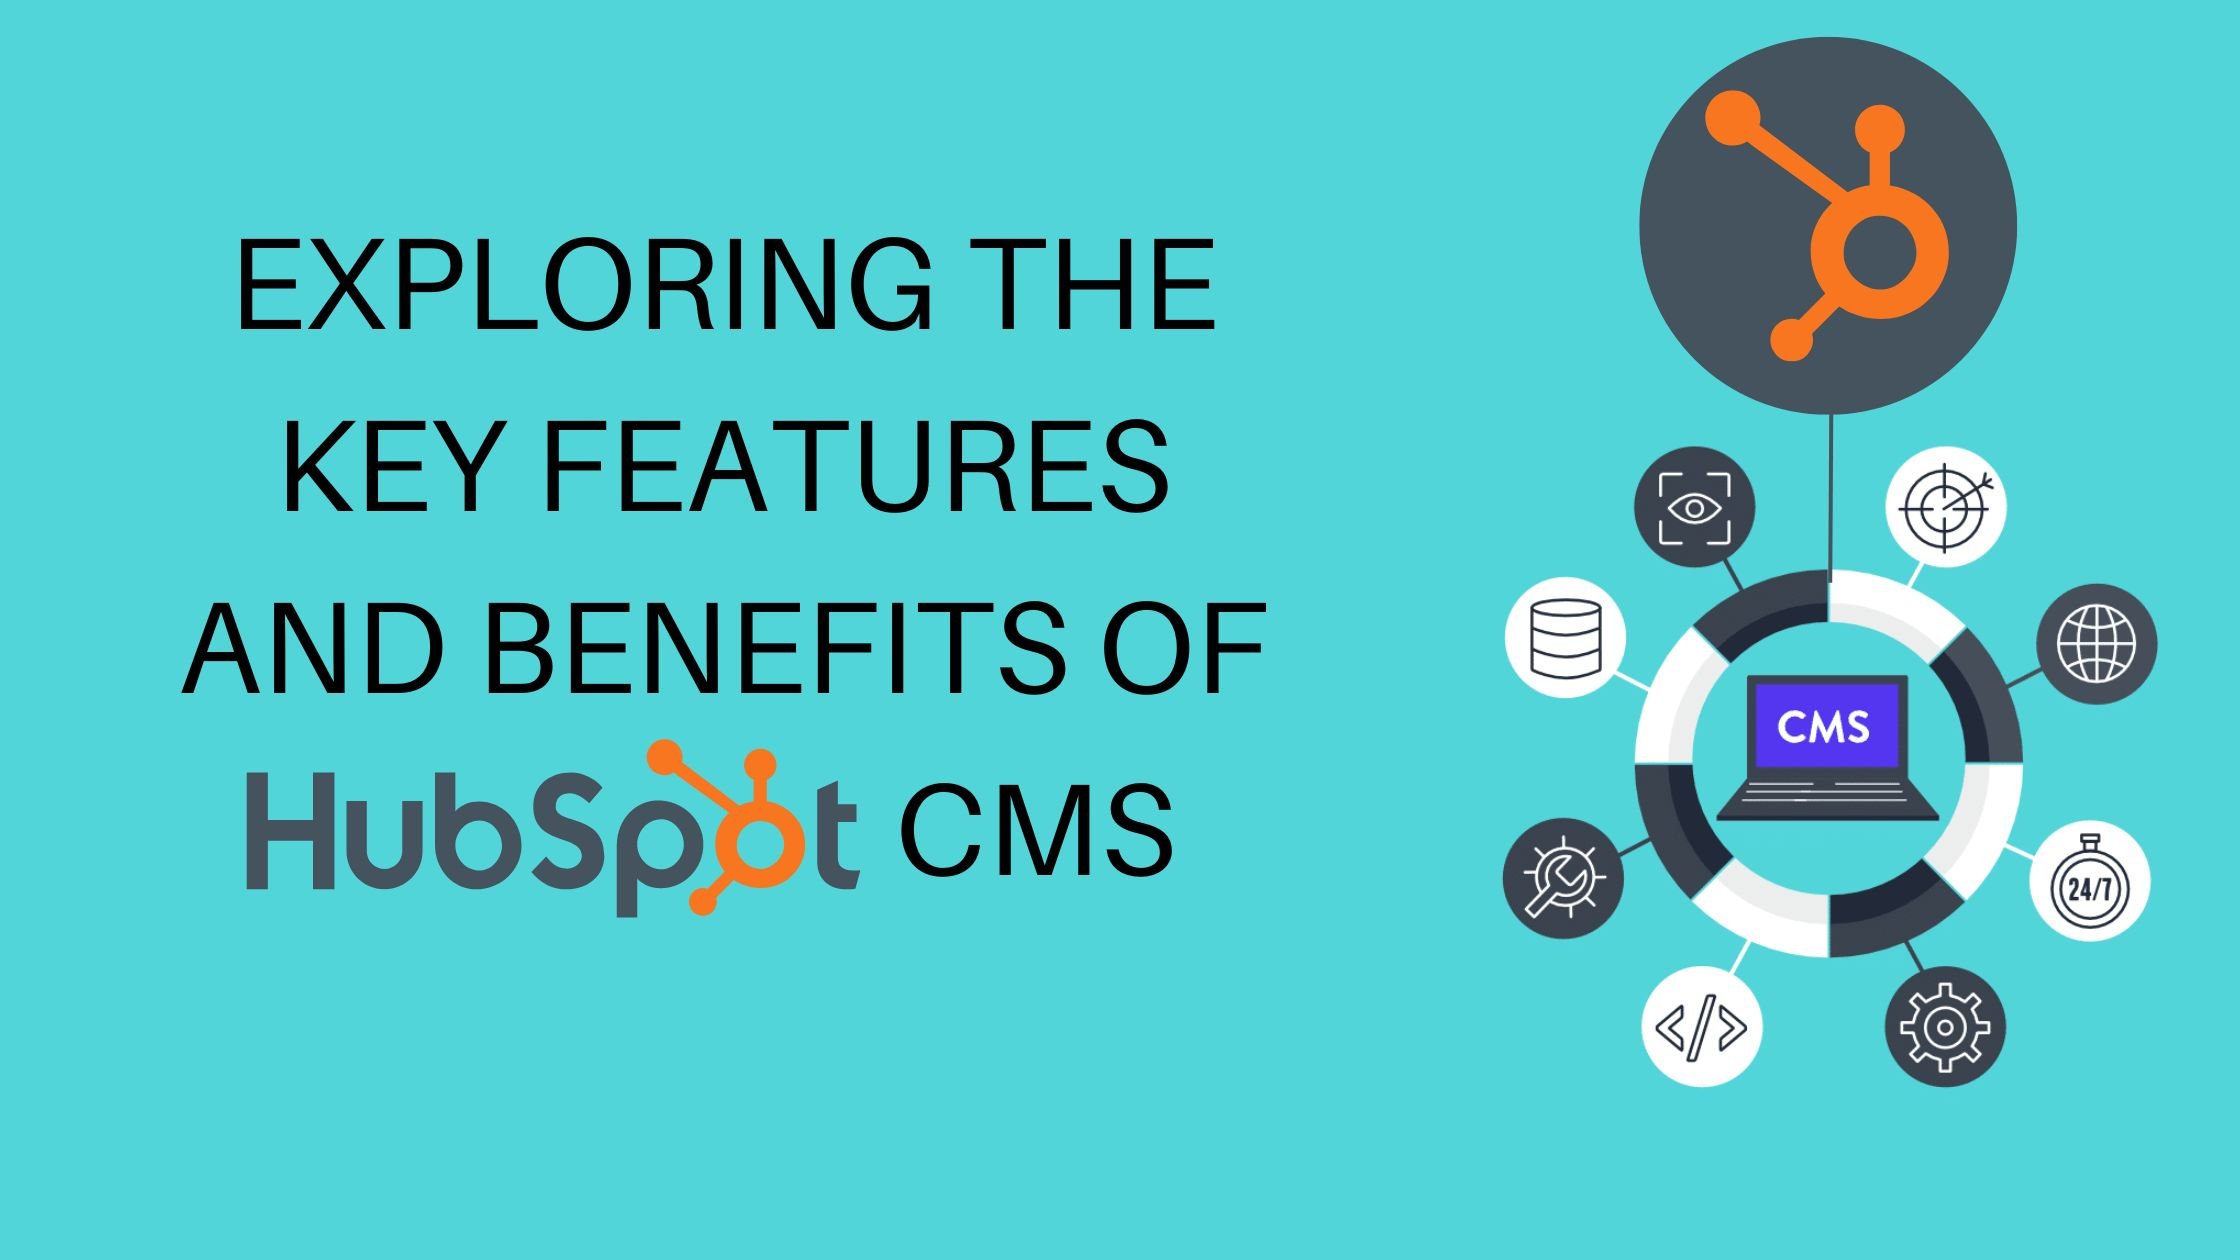 Exploring the Key Features and Benefits of HubSpot CMS